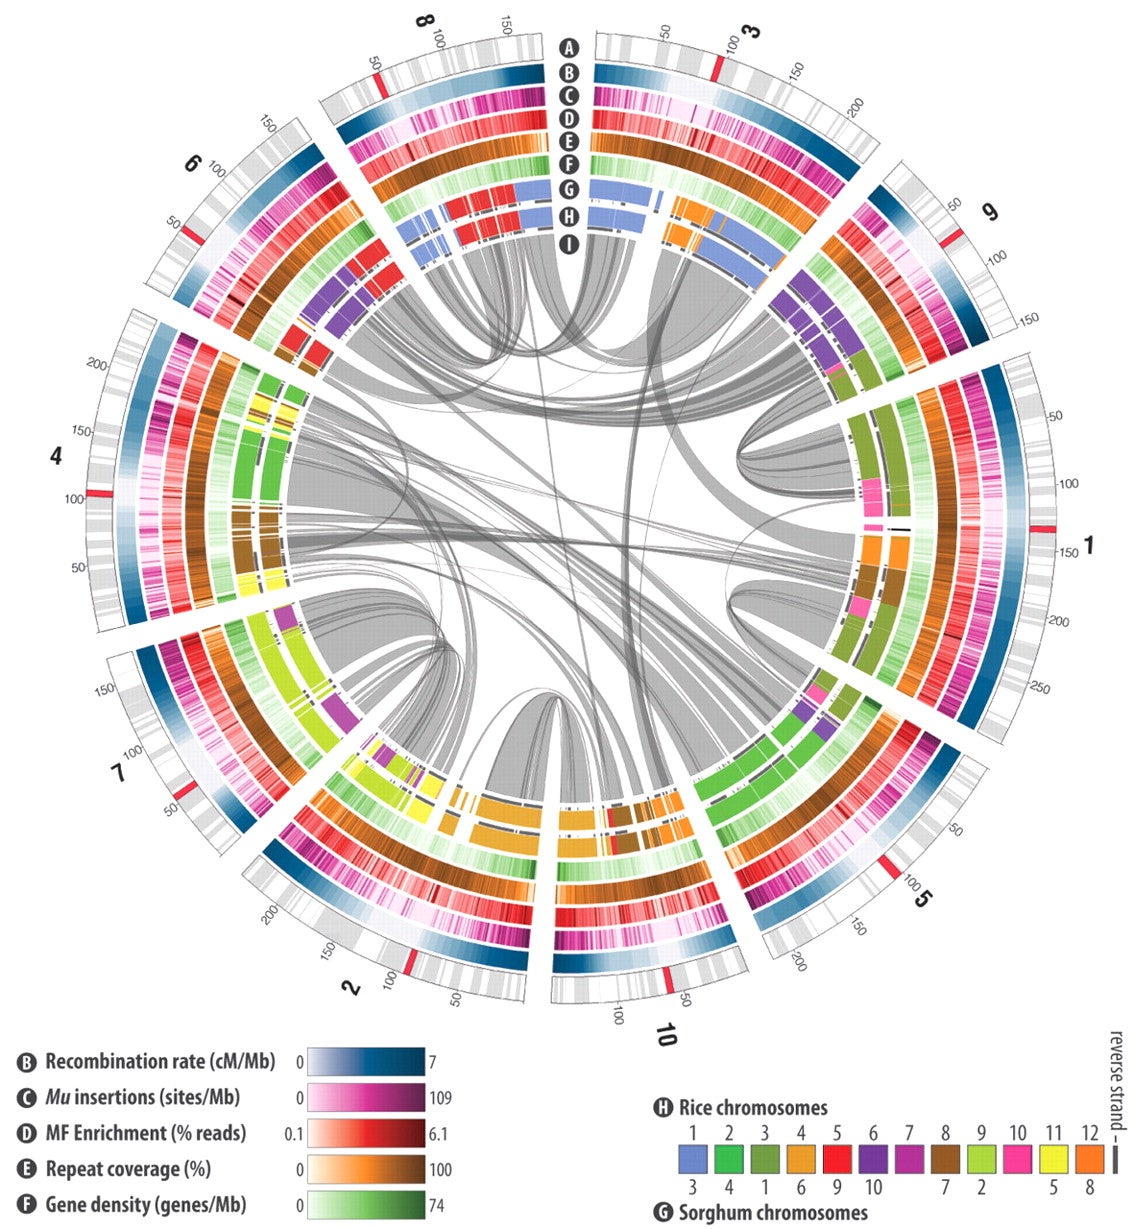 maize B73 reference genome